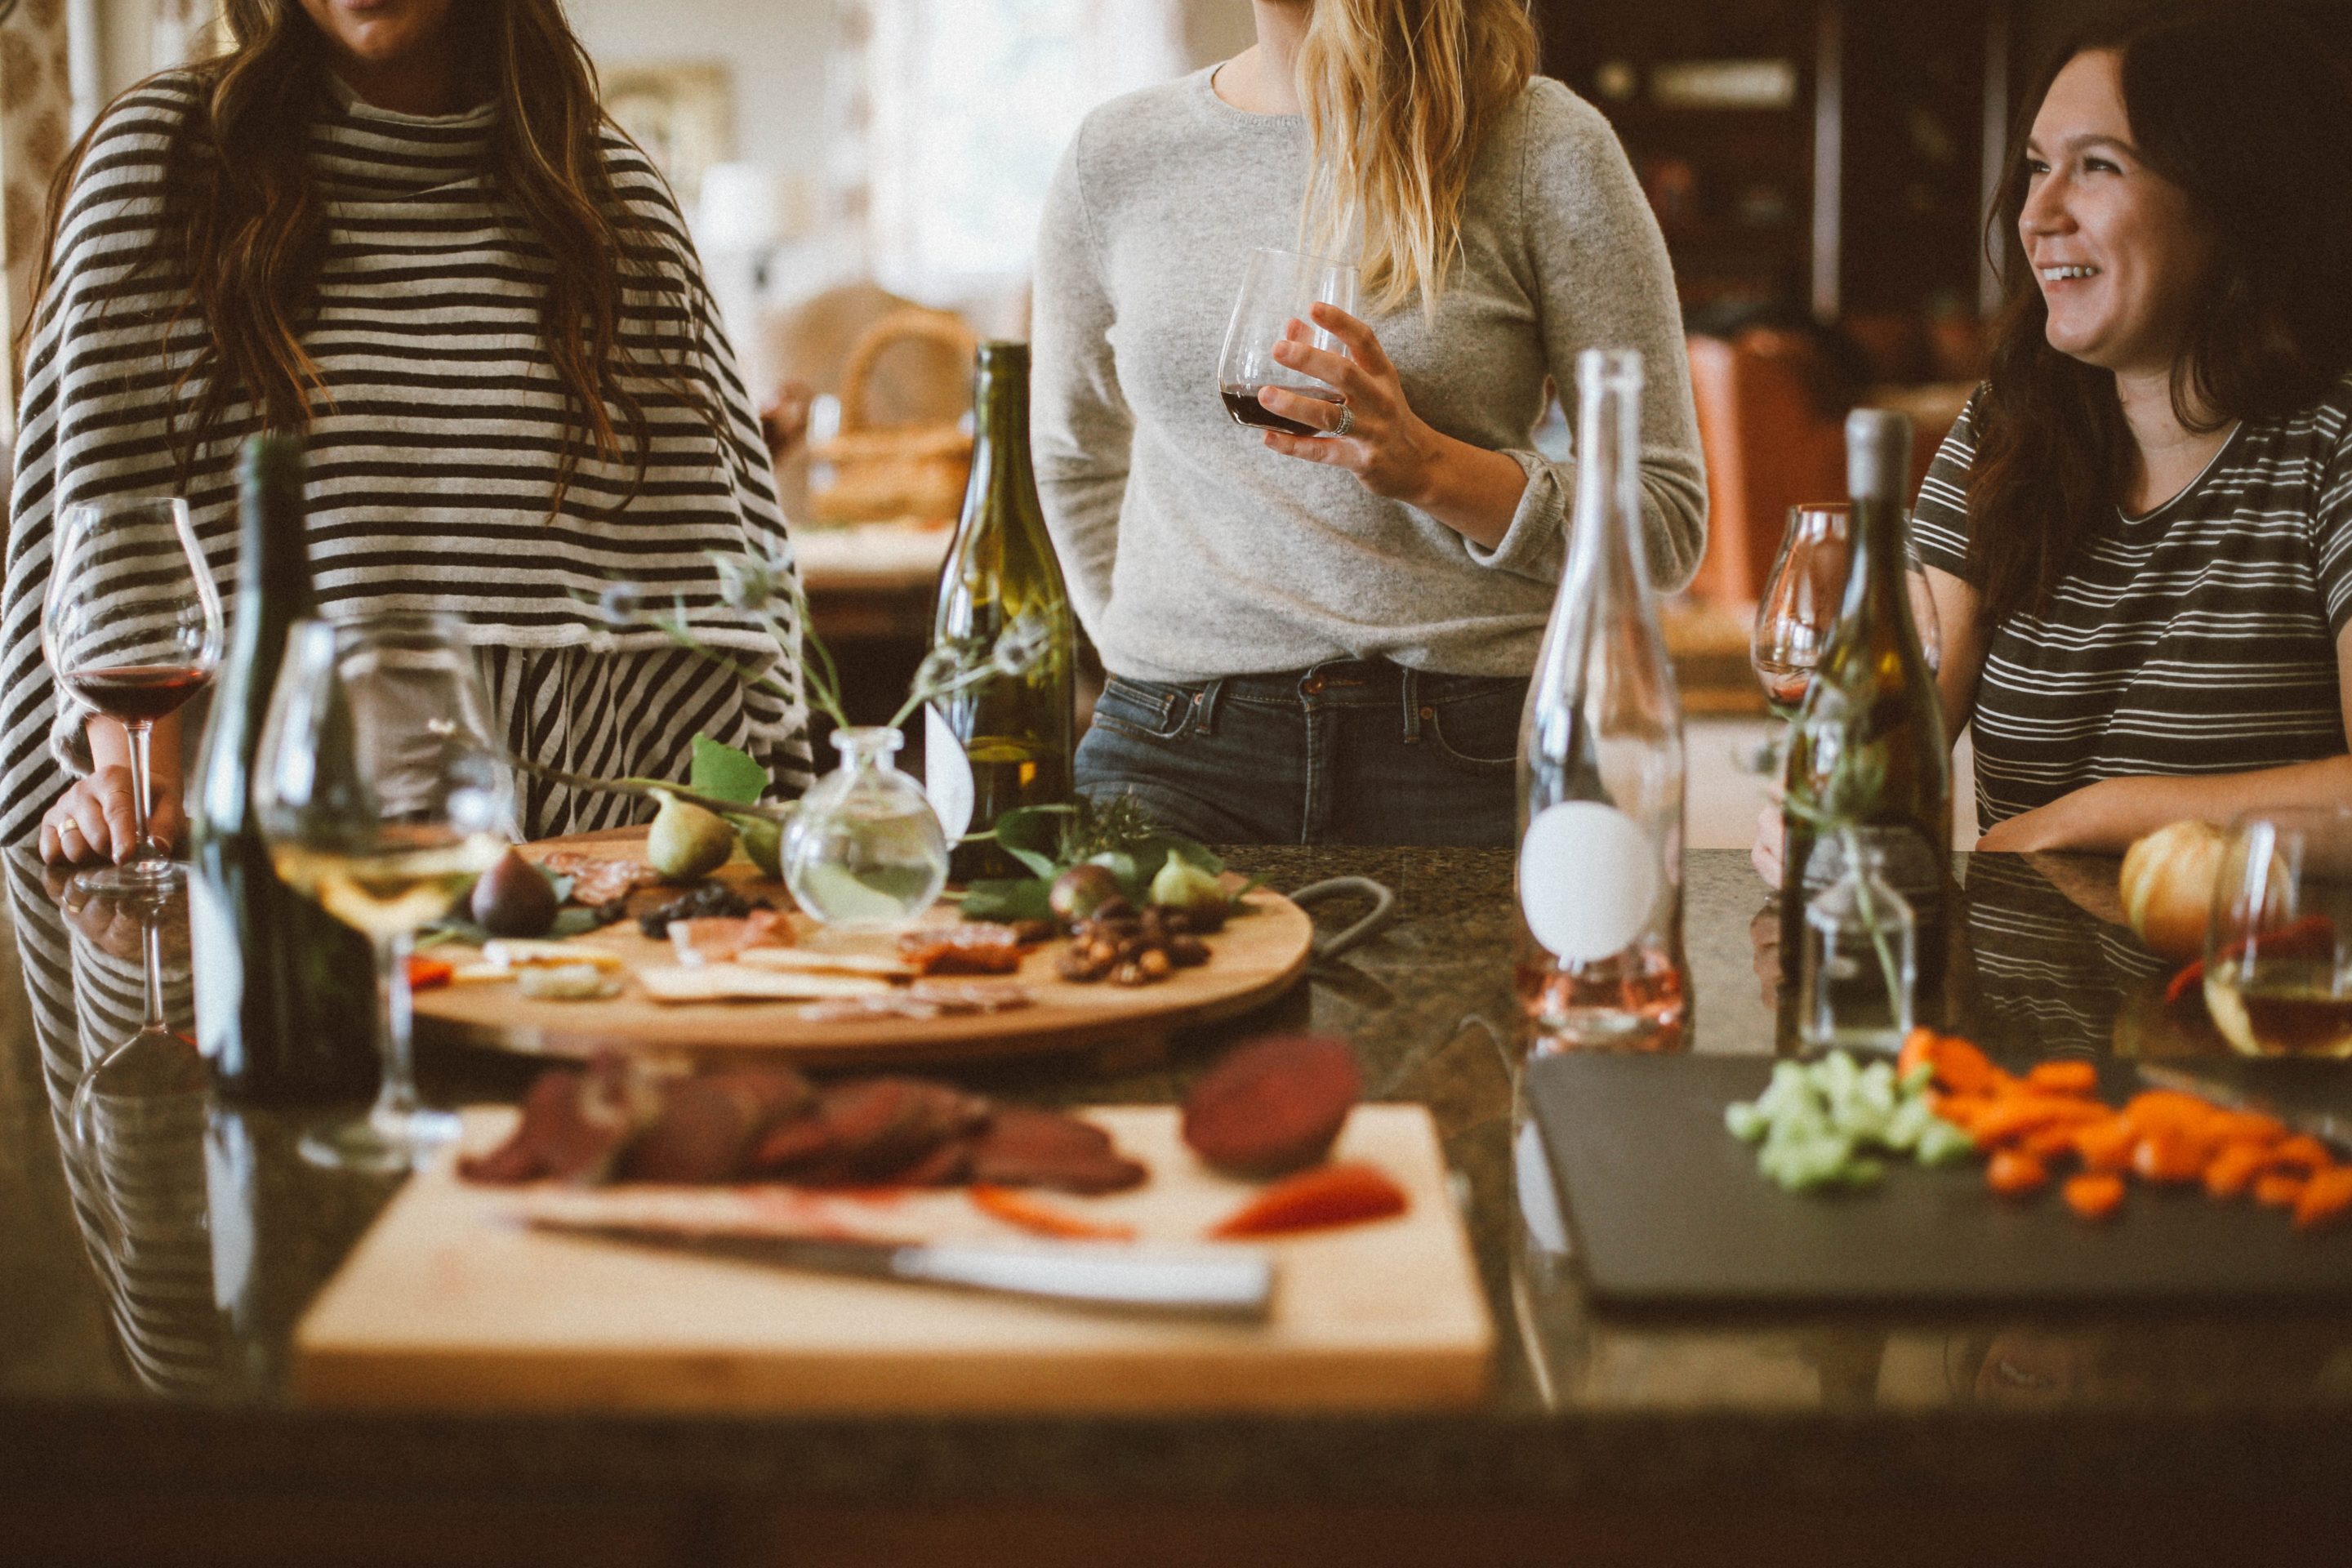 If you are sober, staying that way during this holiday can be very difficult. Here are some tips on how to stay sober during the Thanksgiving holiday: